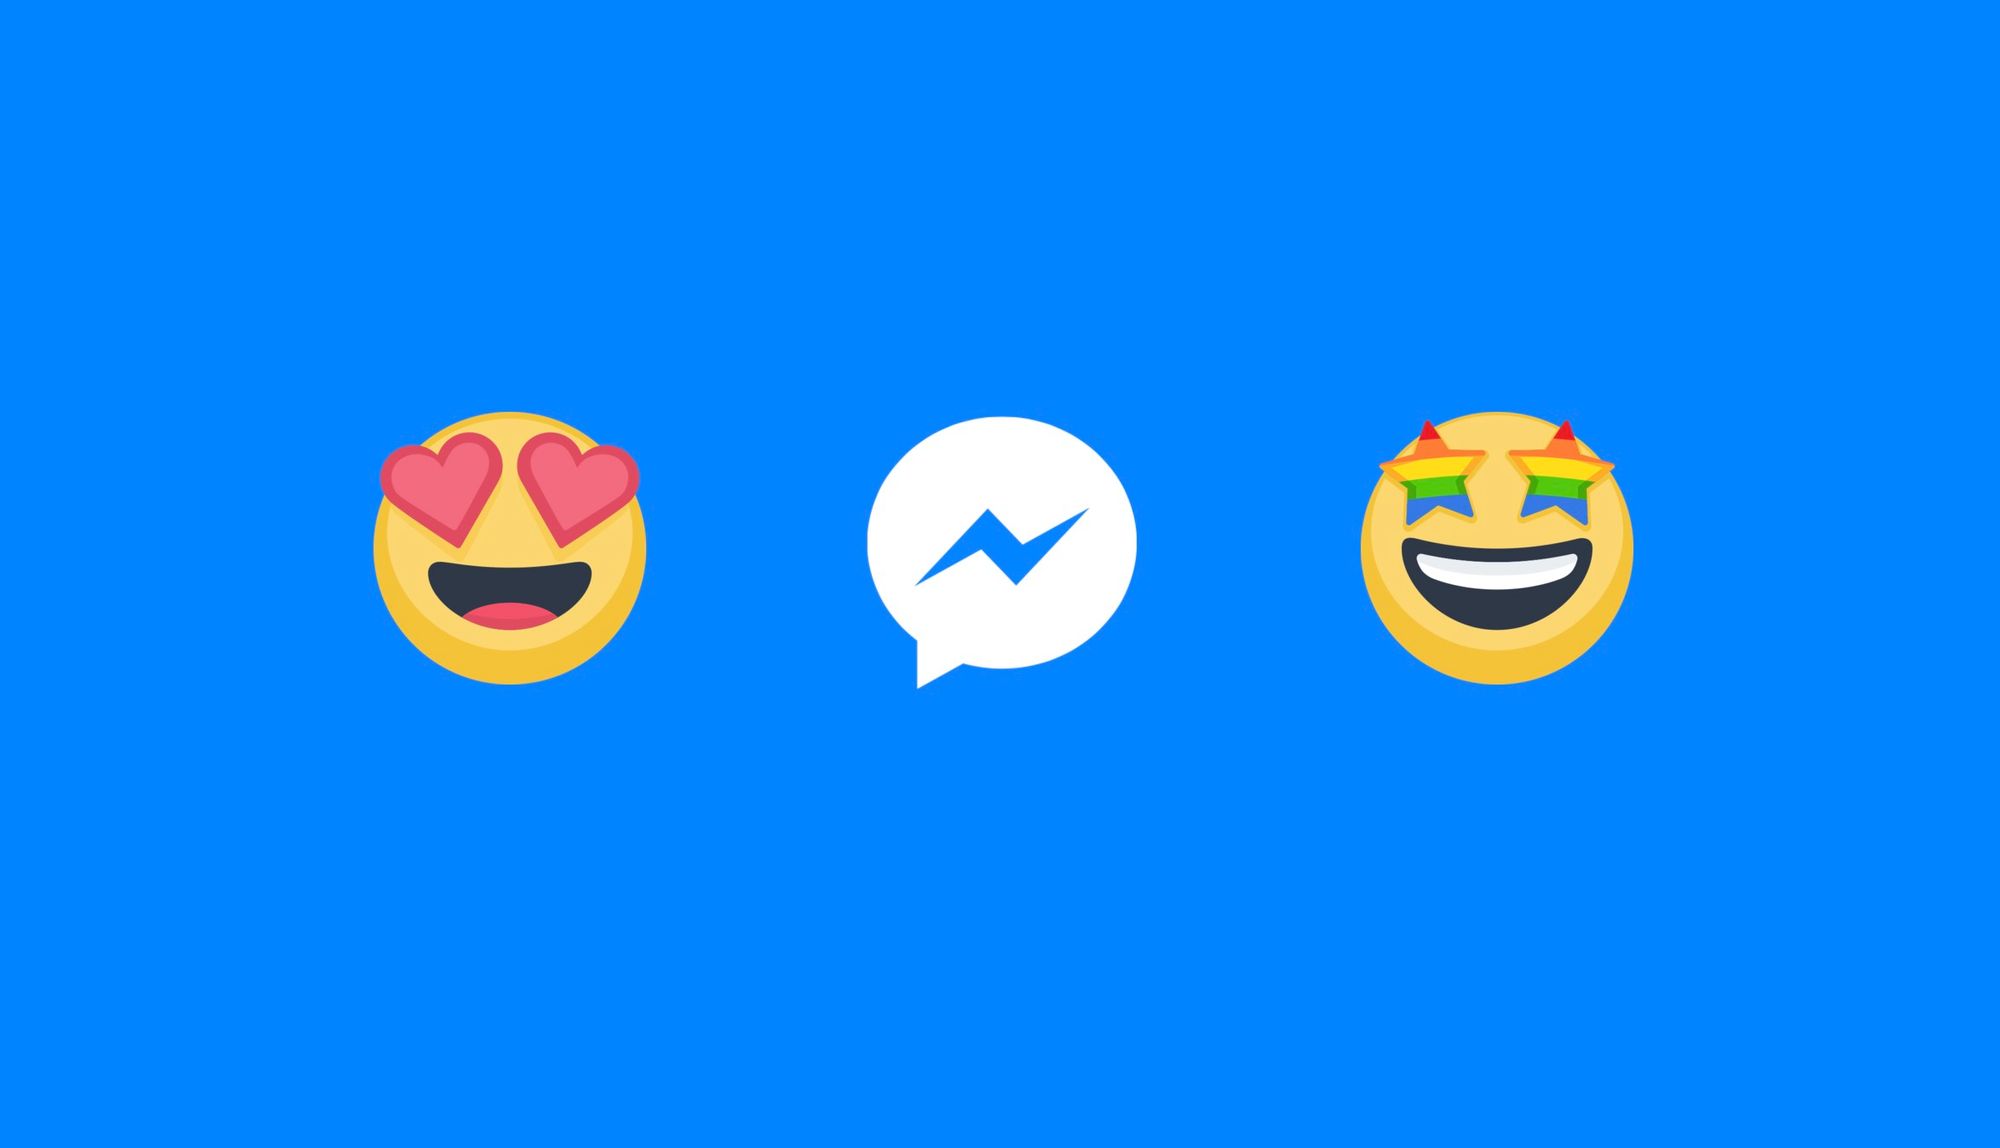 77% Of 56-64 Year Olds Use Emojis On Messenger